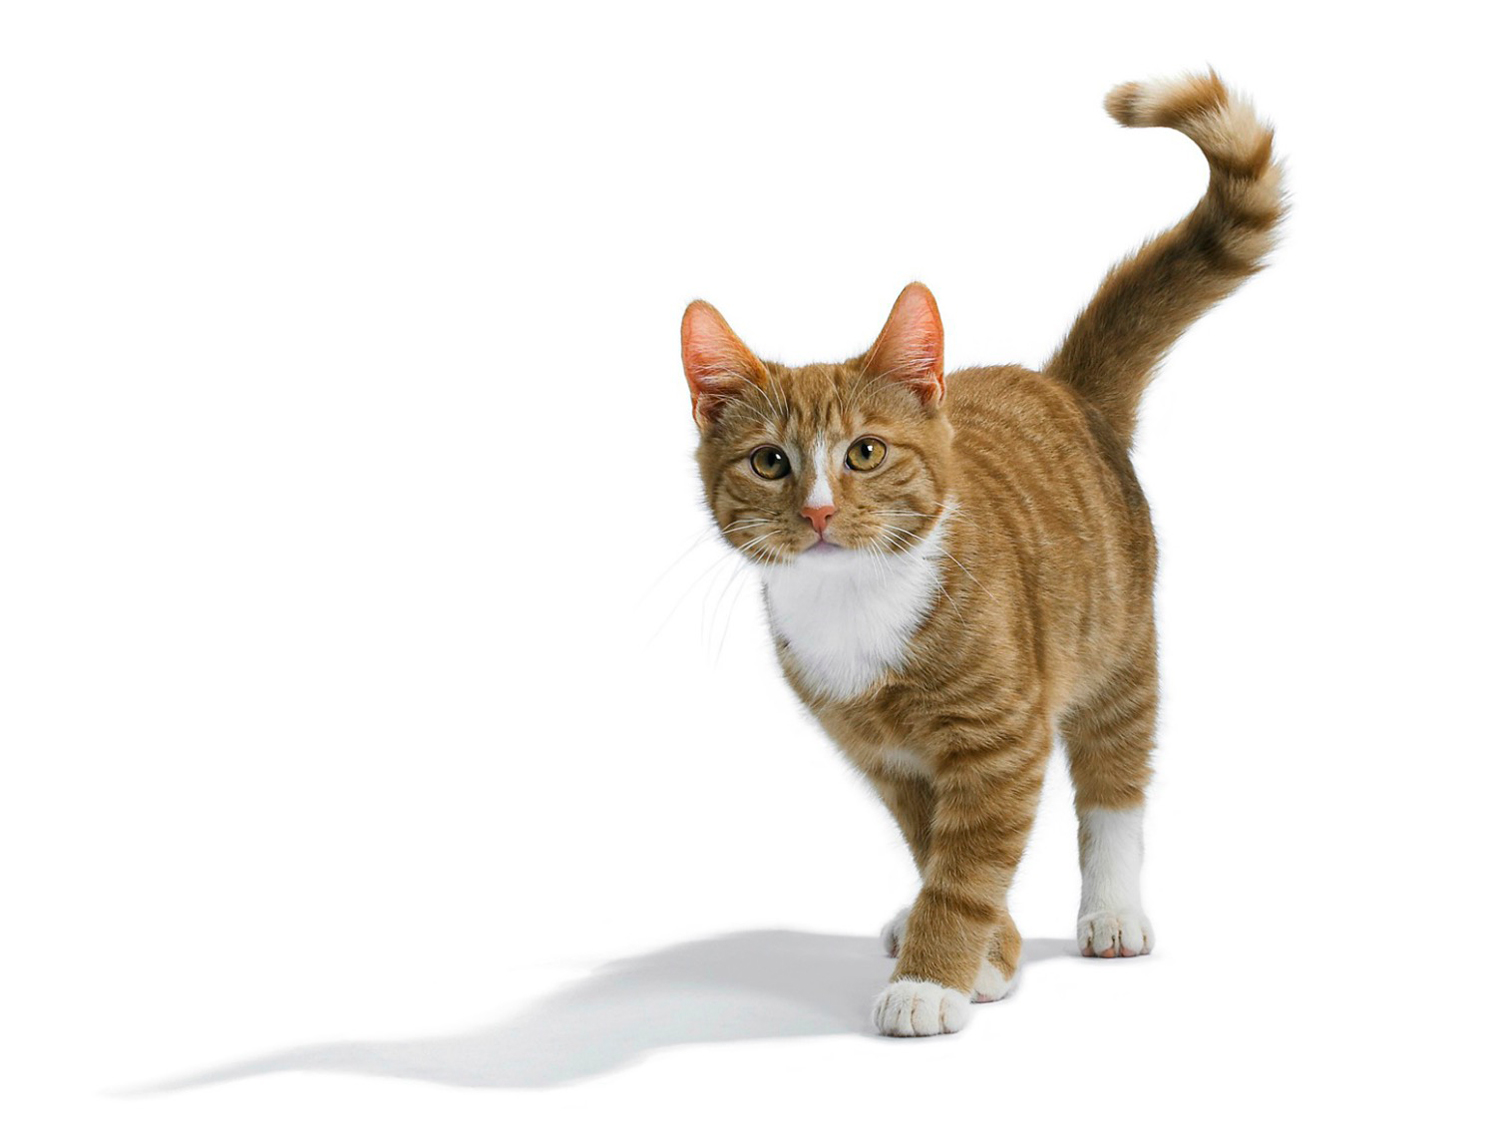 Ginger and White Tom Cat walking towards camera Copyright Gandee Vasan on white background. Pet and animal photography